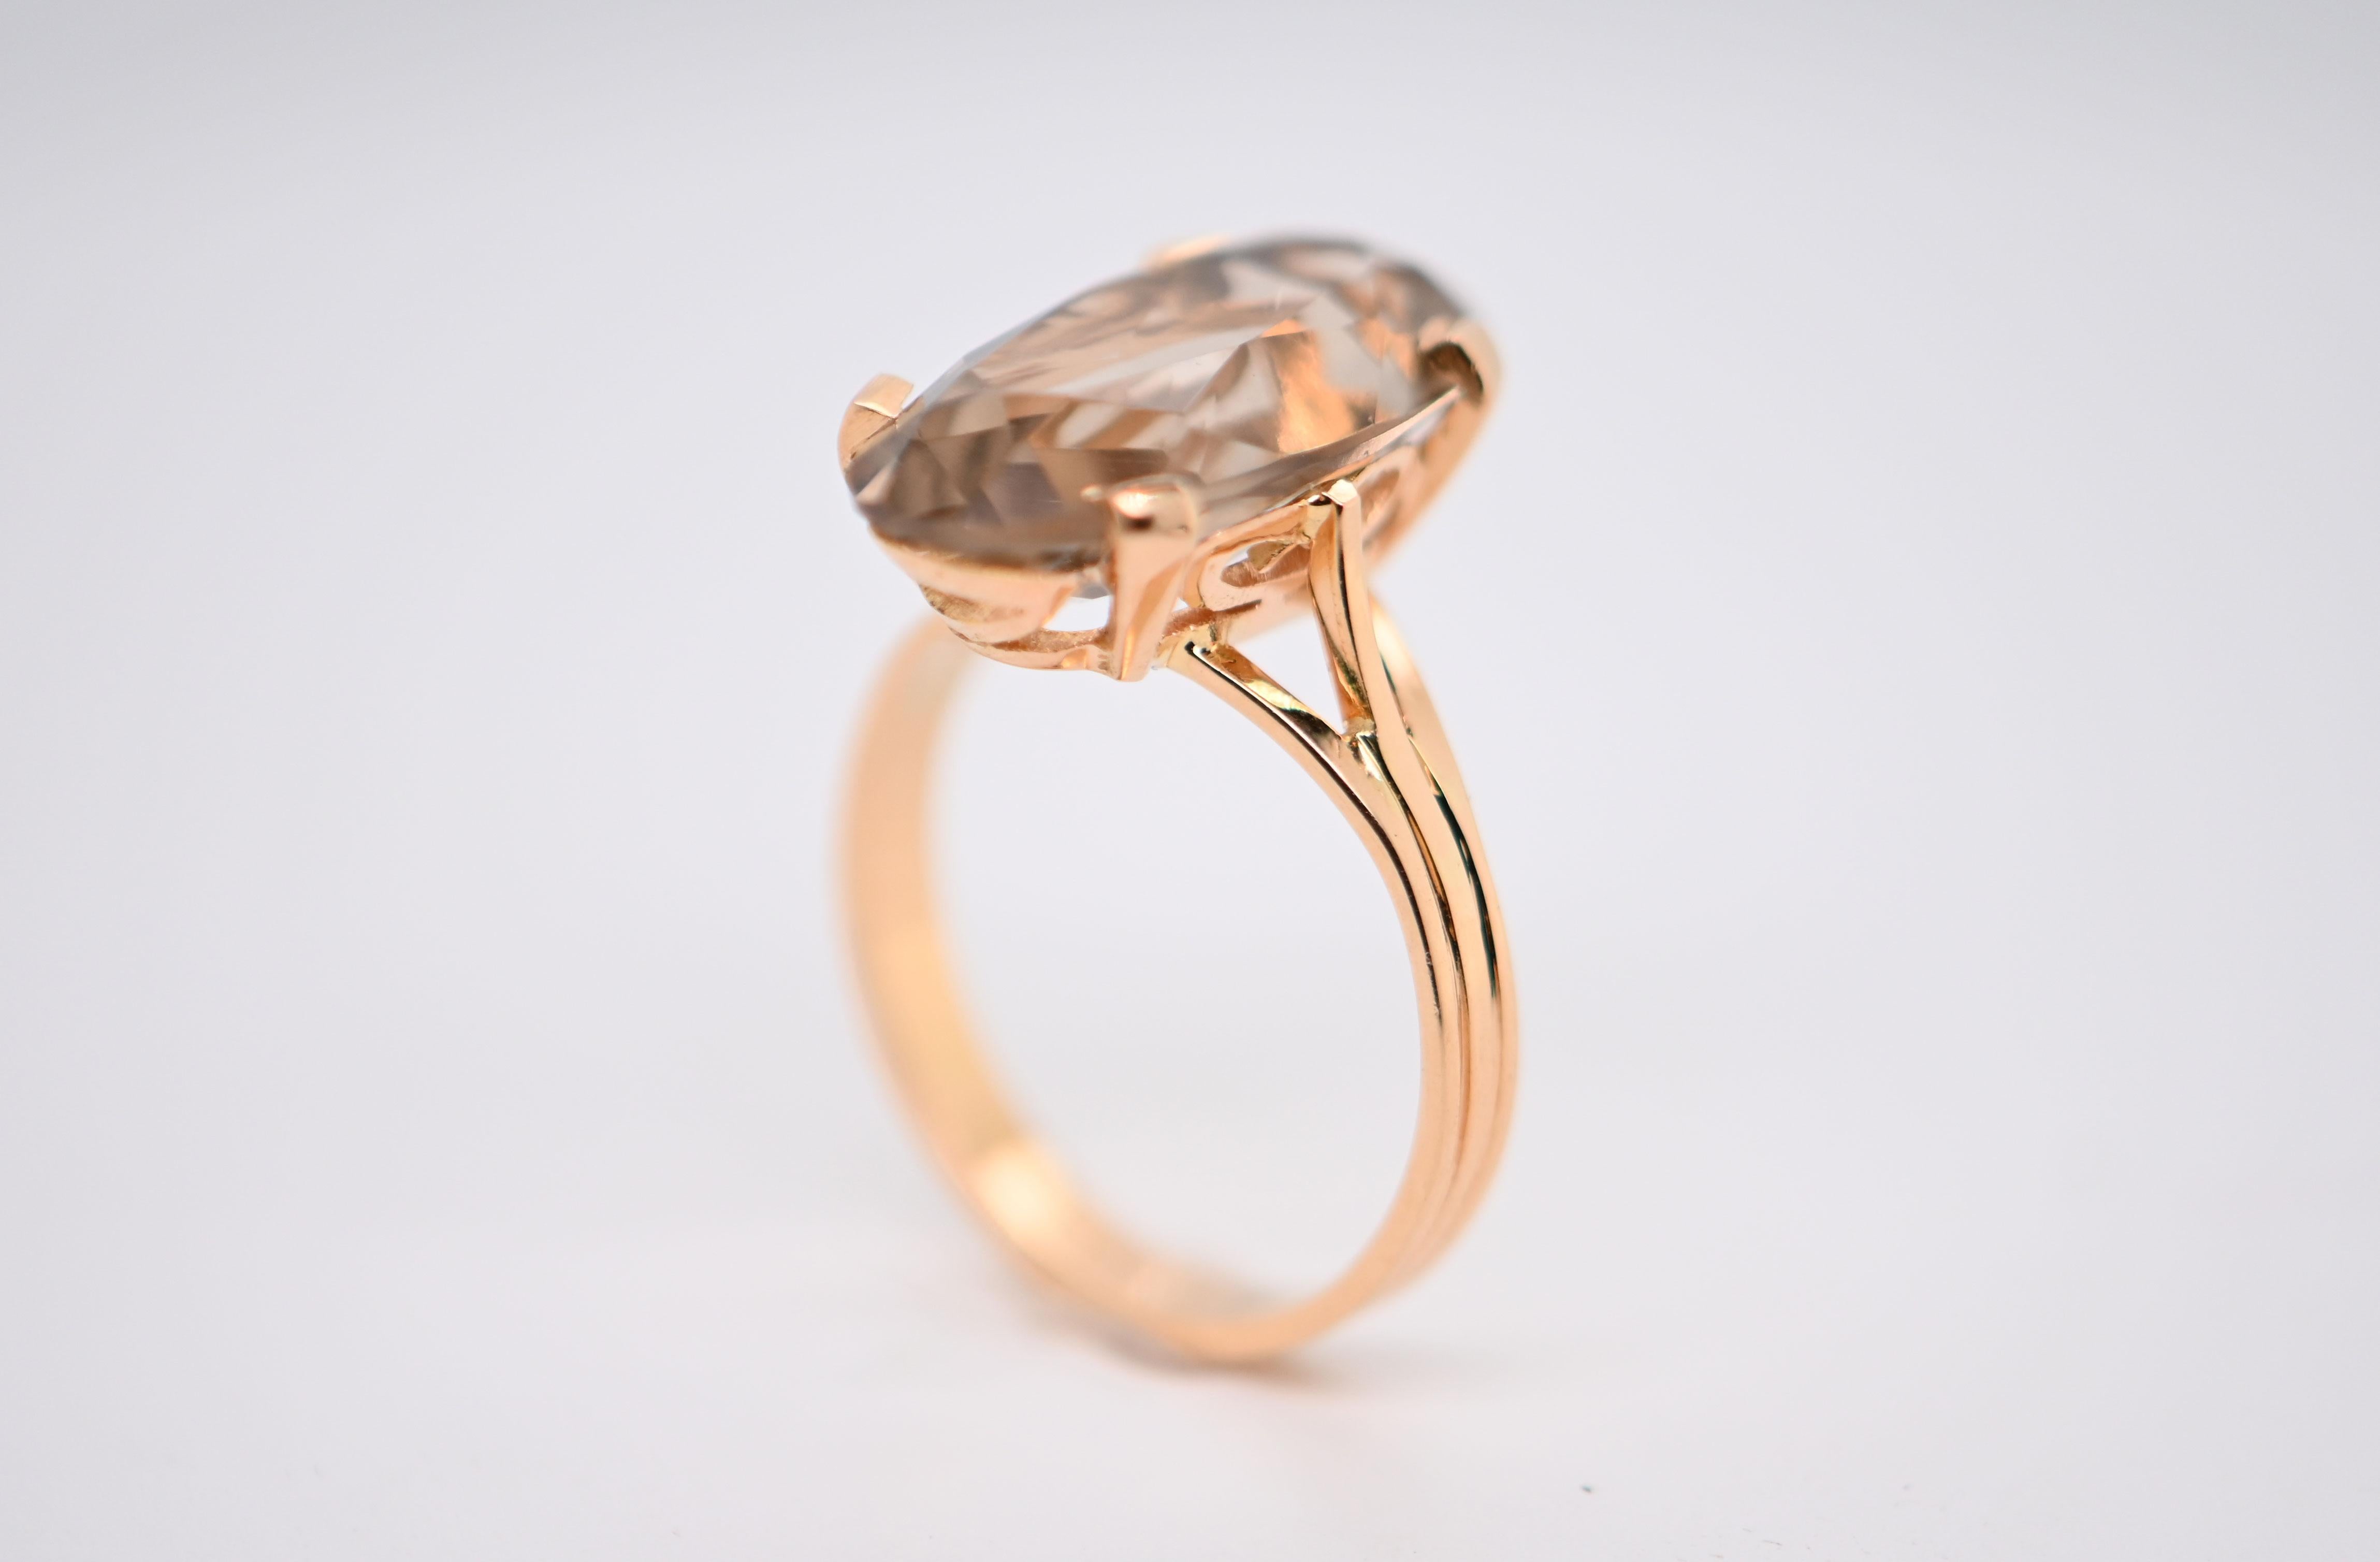 Discover the elegance of this ring from the 1970s, a rare piece that combines the art of vintage design with the magnificence of jewelry craftsmanship. Set on a yellow gold frame, this ring embodies the very essence of 1970s style.

The central